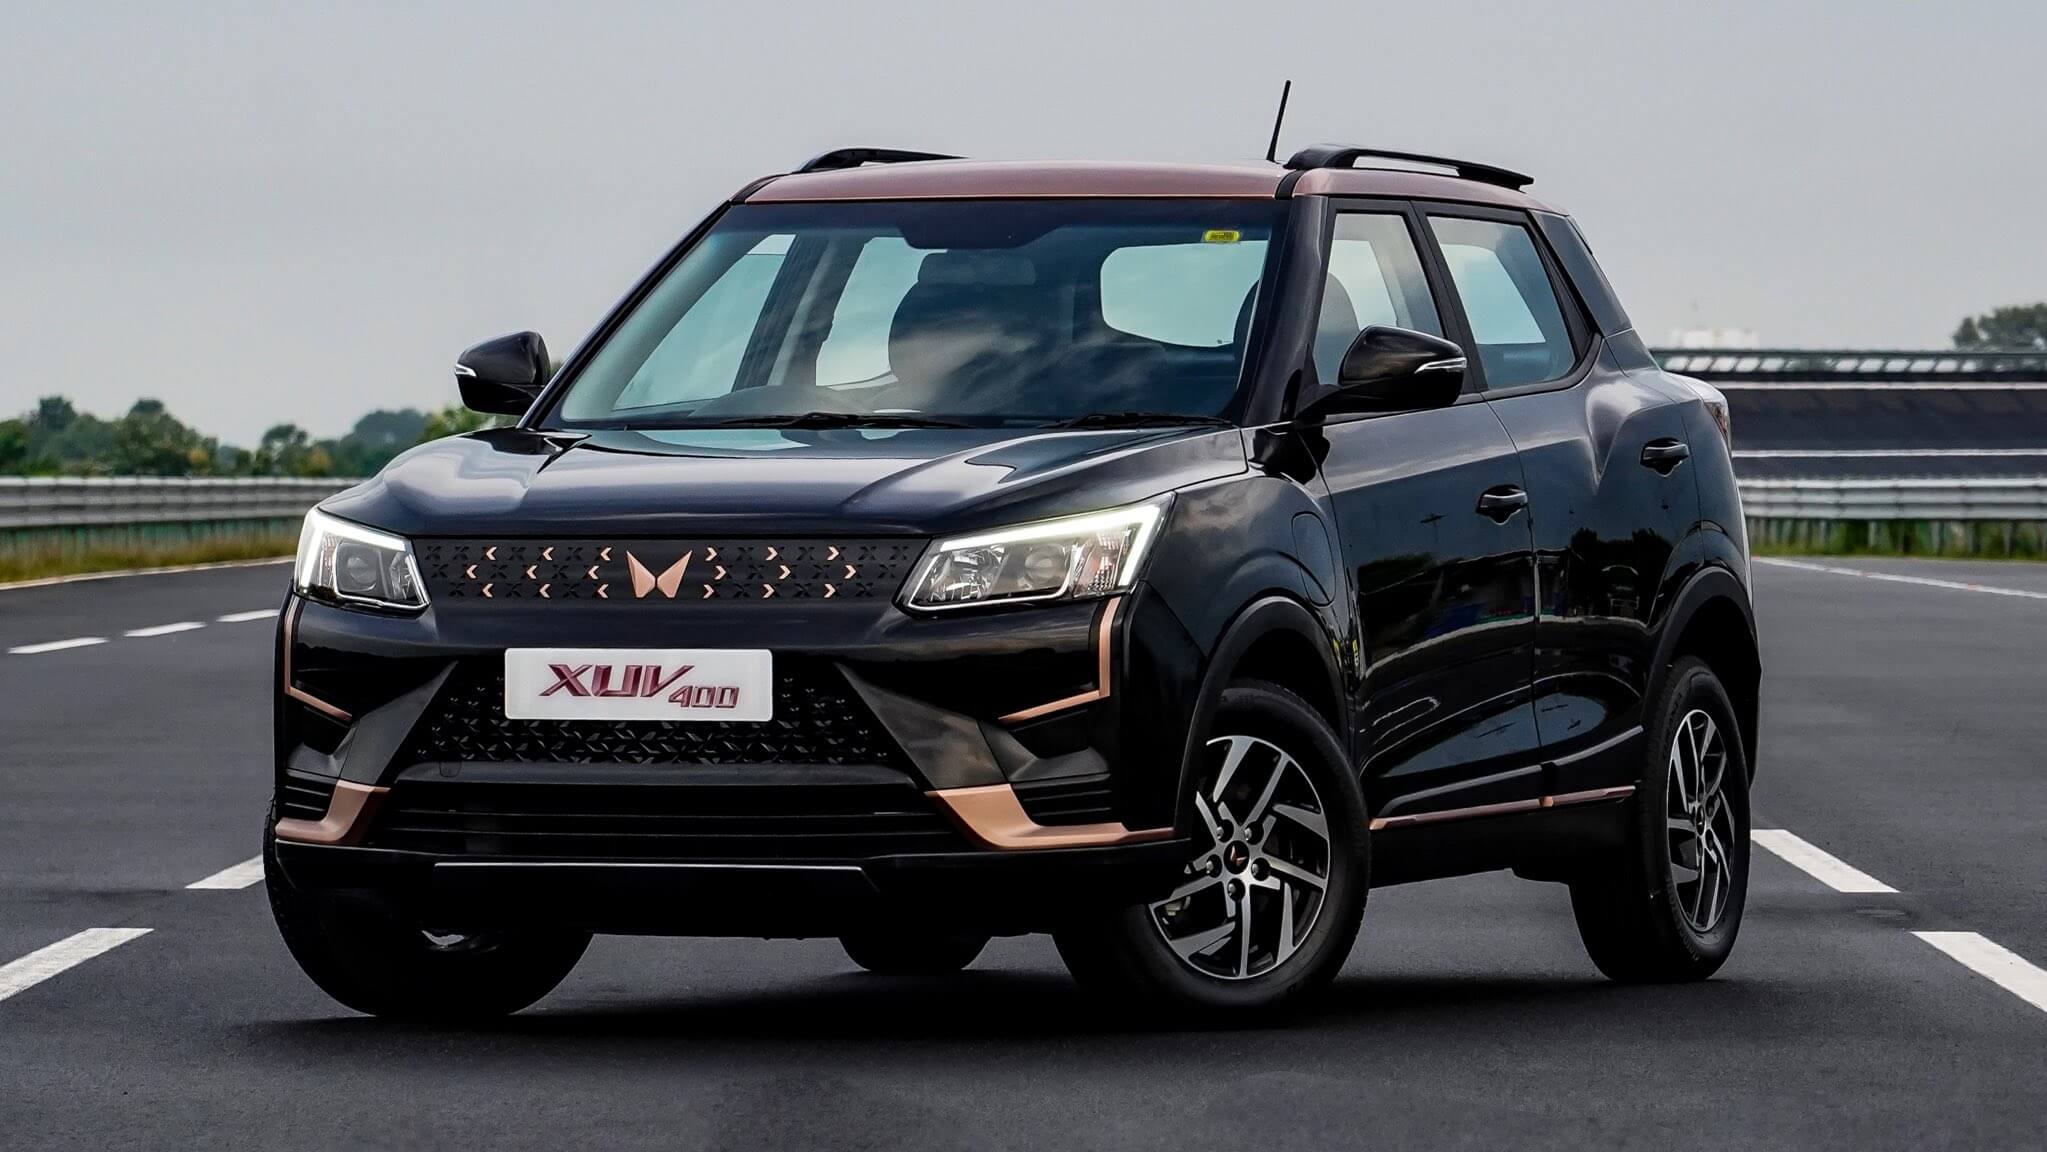 https://e-vehicleinfo.com/mahindra-opens-test-drive-for-all-electric-xuv400/